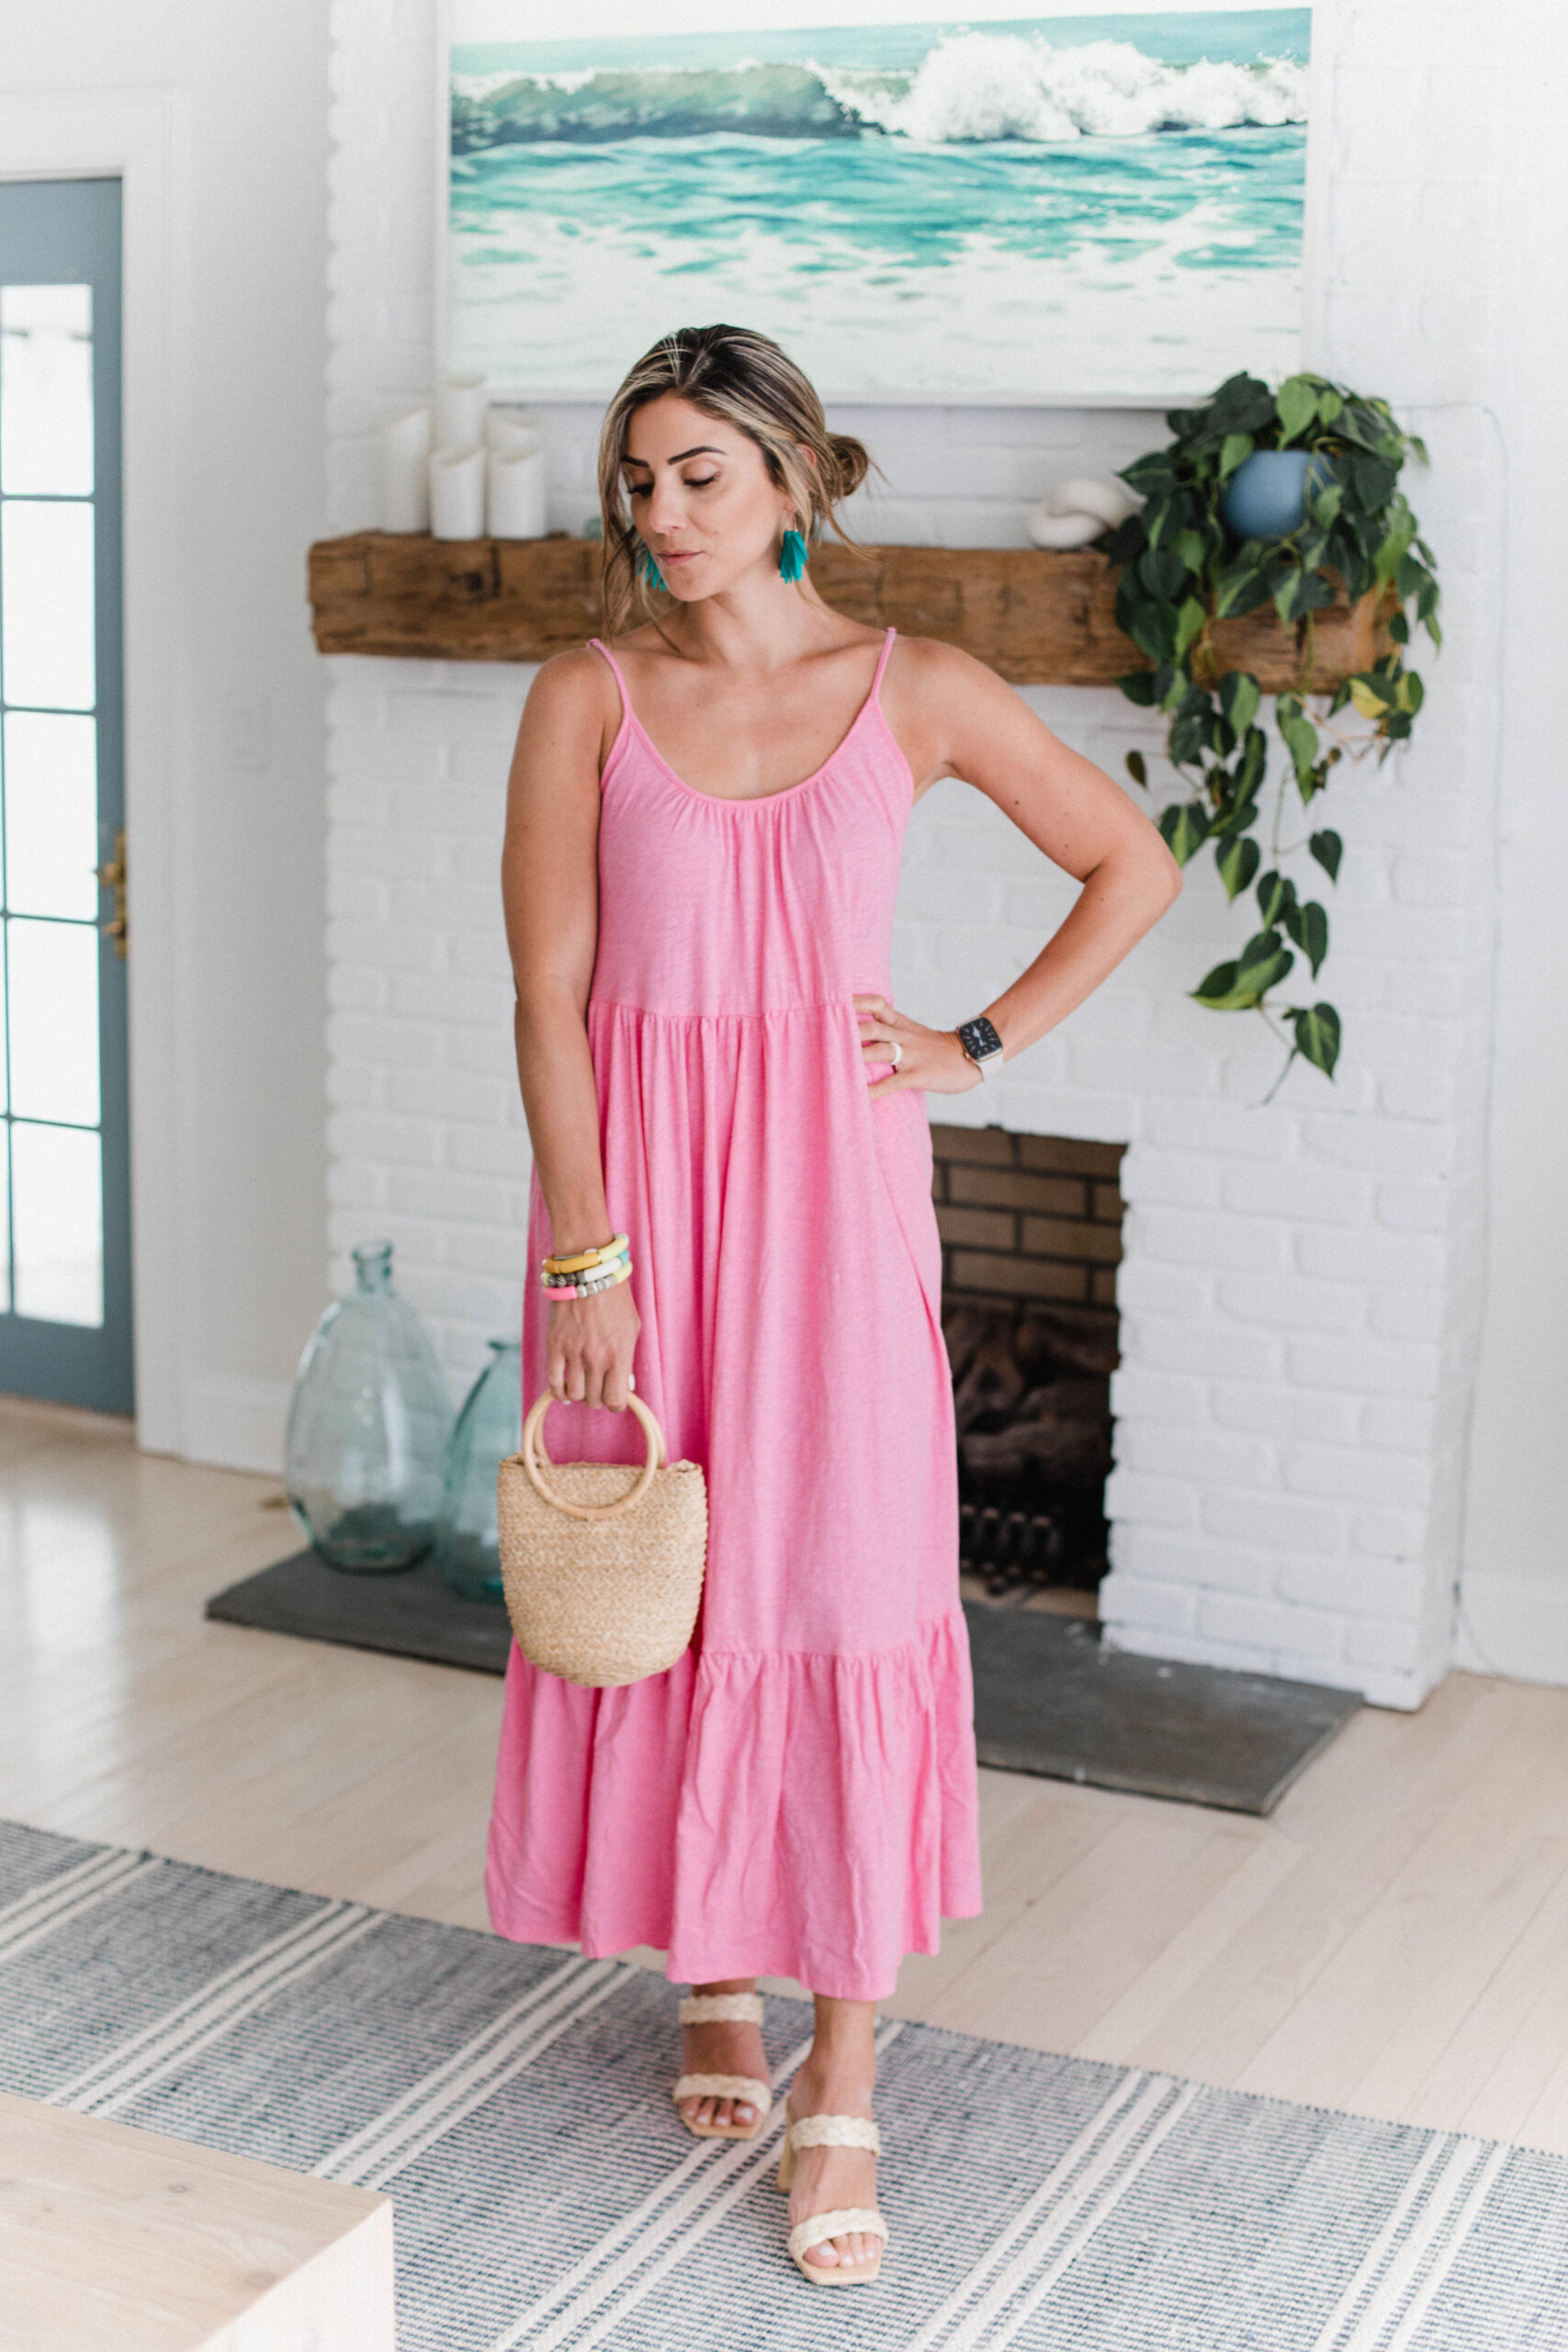 Connecticut life and style blogger Lauren McBride shares seven spring dresses perfect for spring events or vacation.